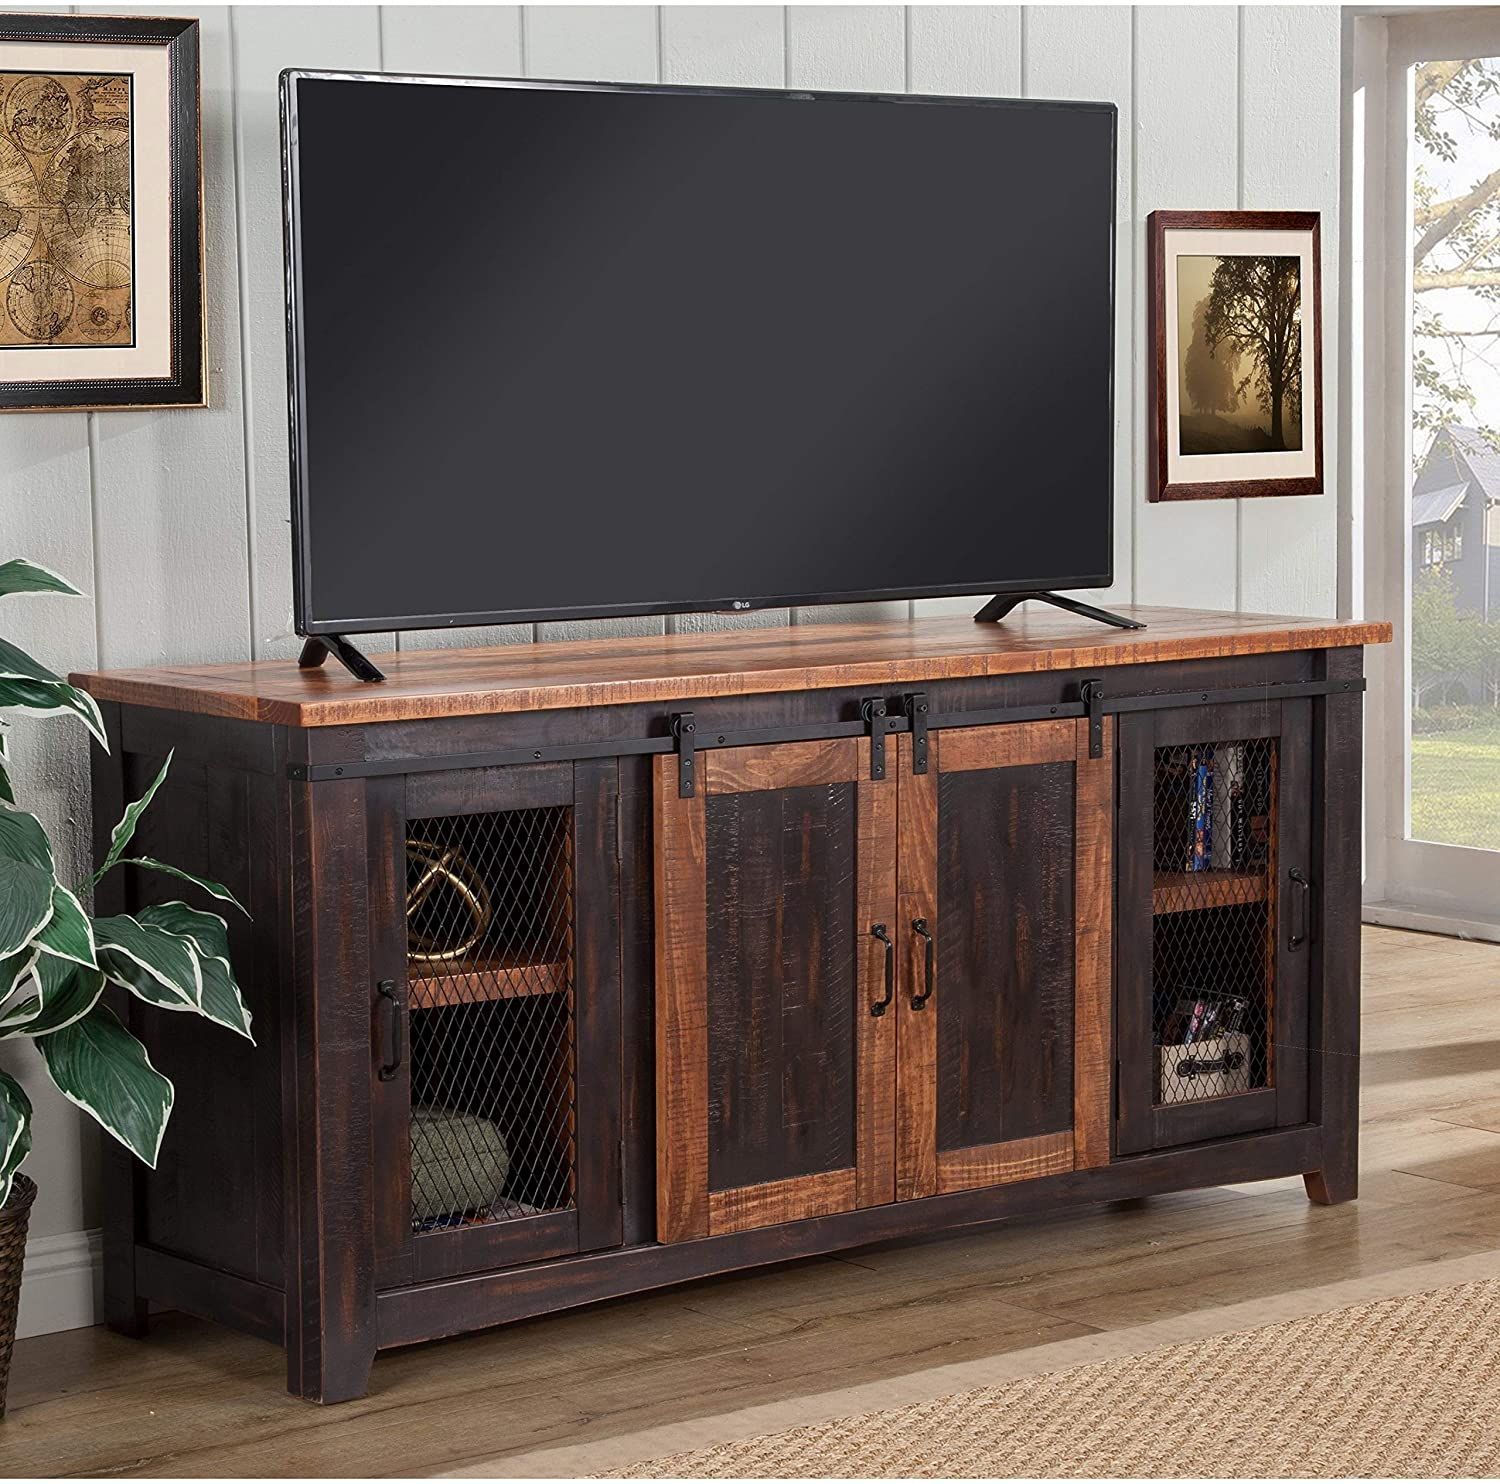 Santa Fe 65" Tv Stand – 65 Inches In Width Black Brown Regarding Reclaimed Wood And Metal Tv Stands (View 4 of 15)